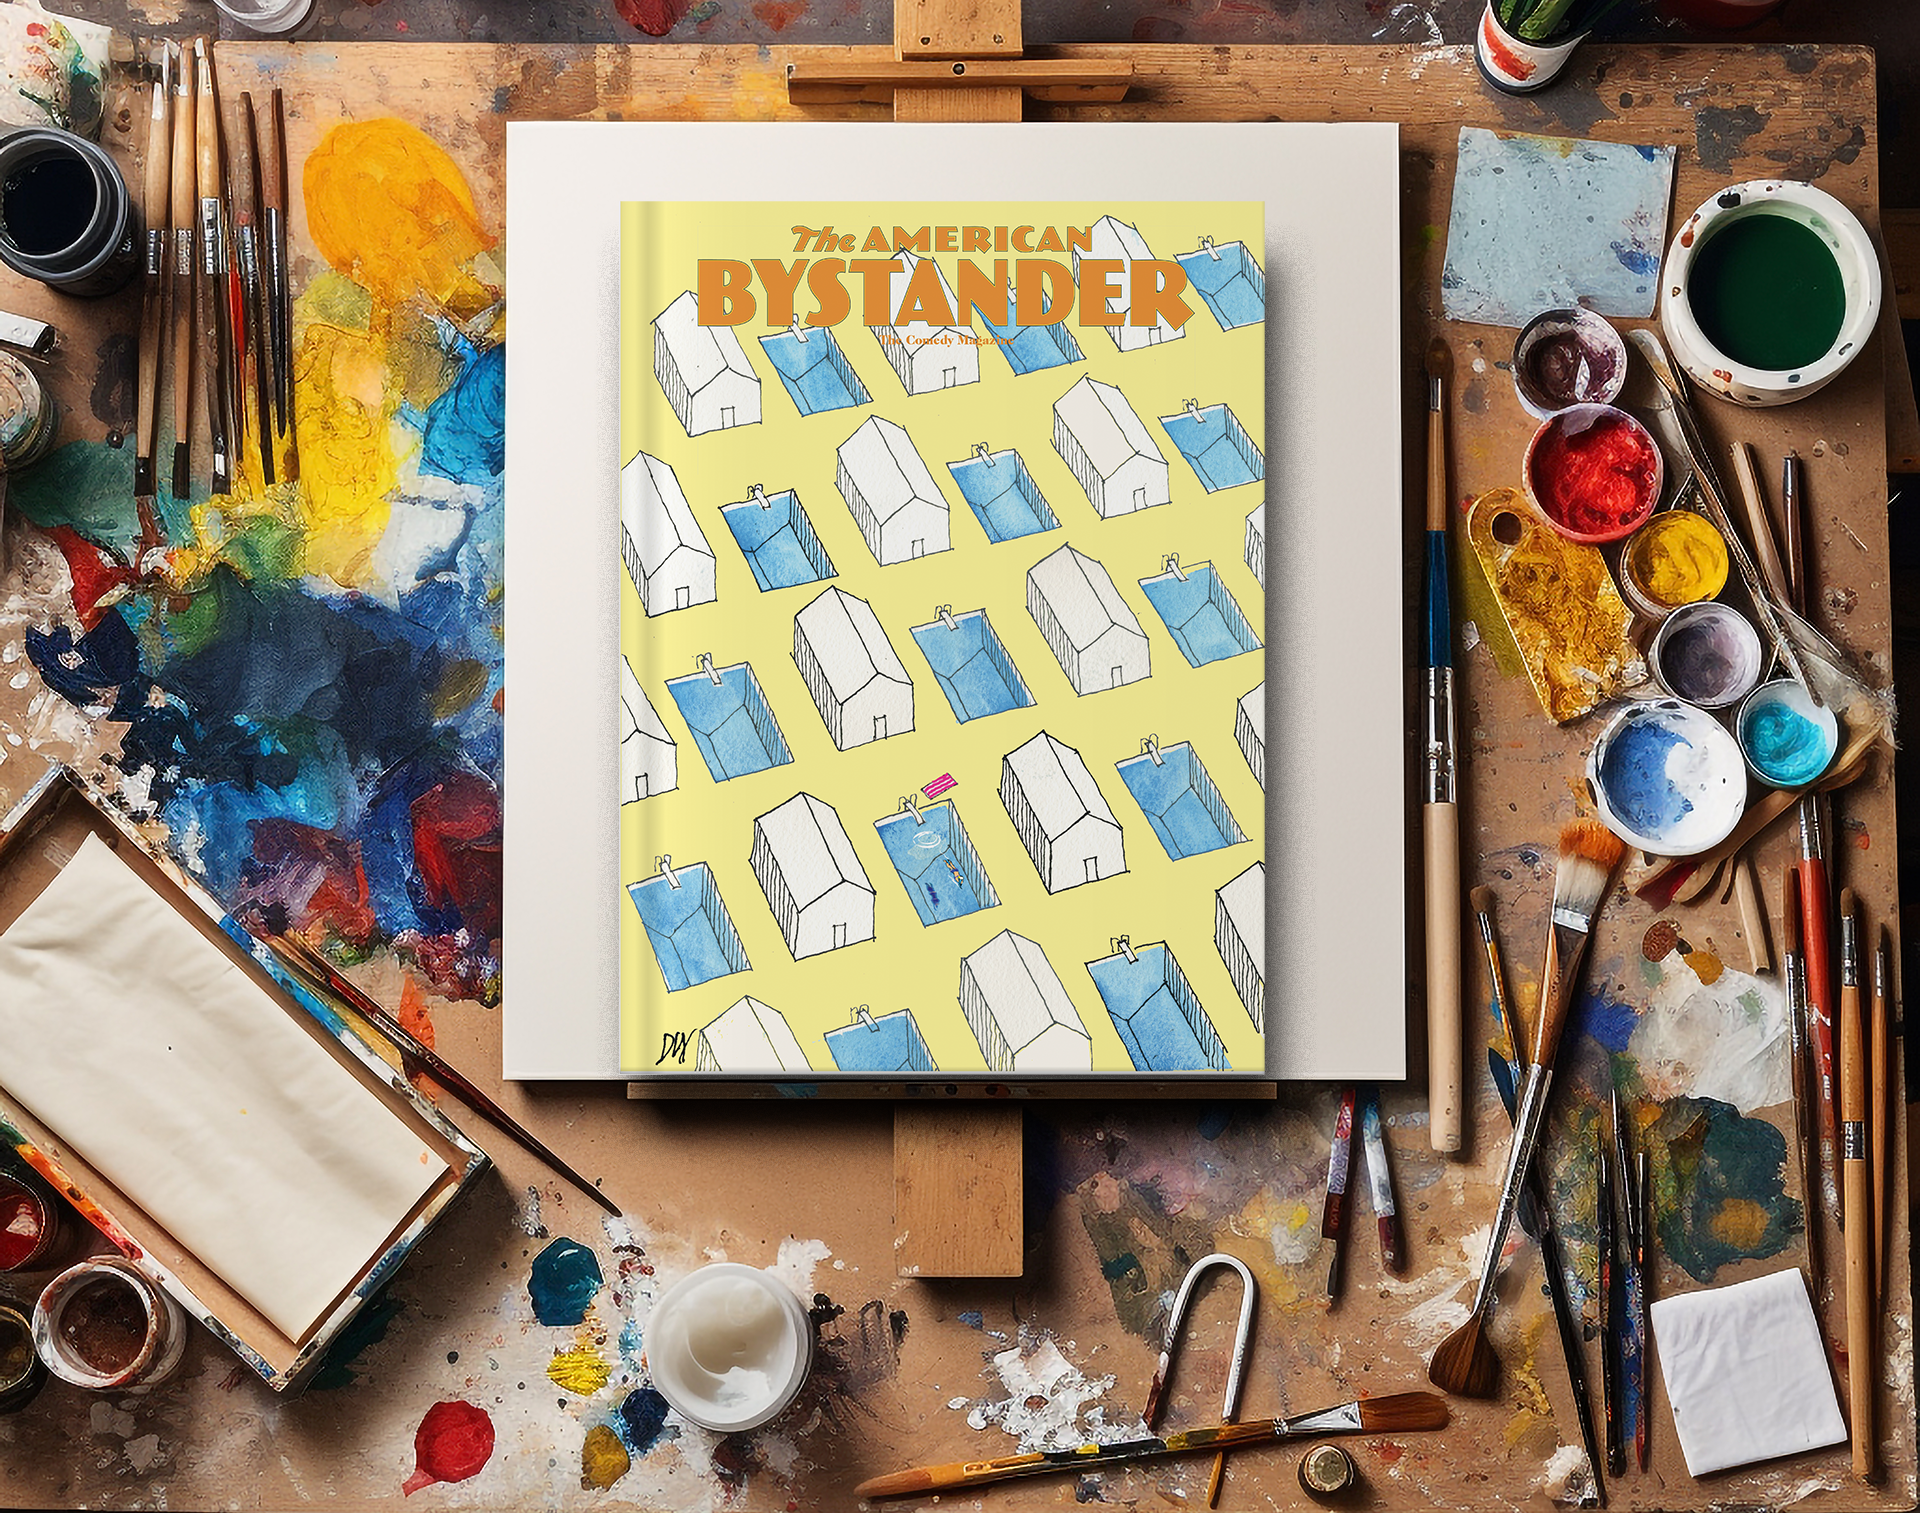 American Bystander Issue 26 with vibrant yellow and blue cover by Don Watson, placed on an artist's table adorned with paint brushes and splatters of paint.